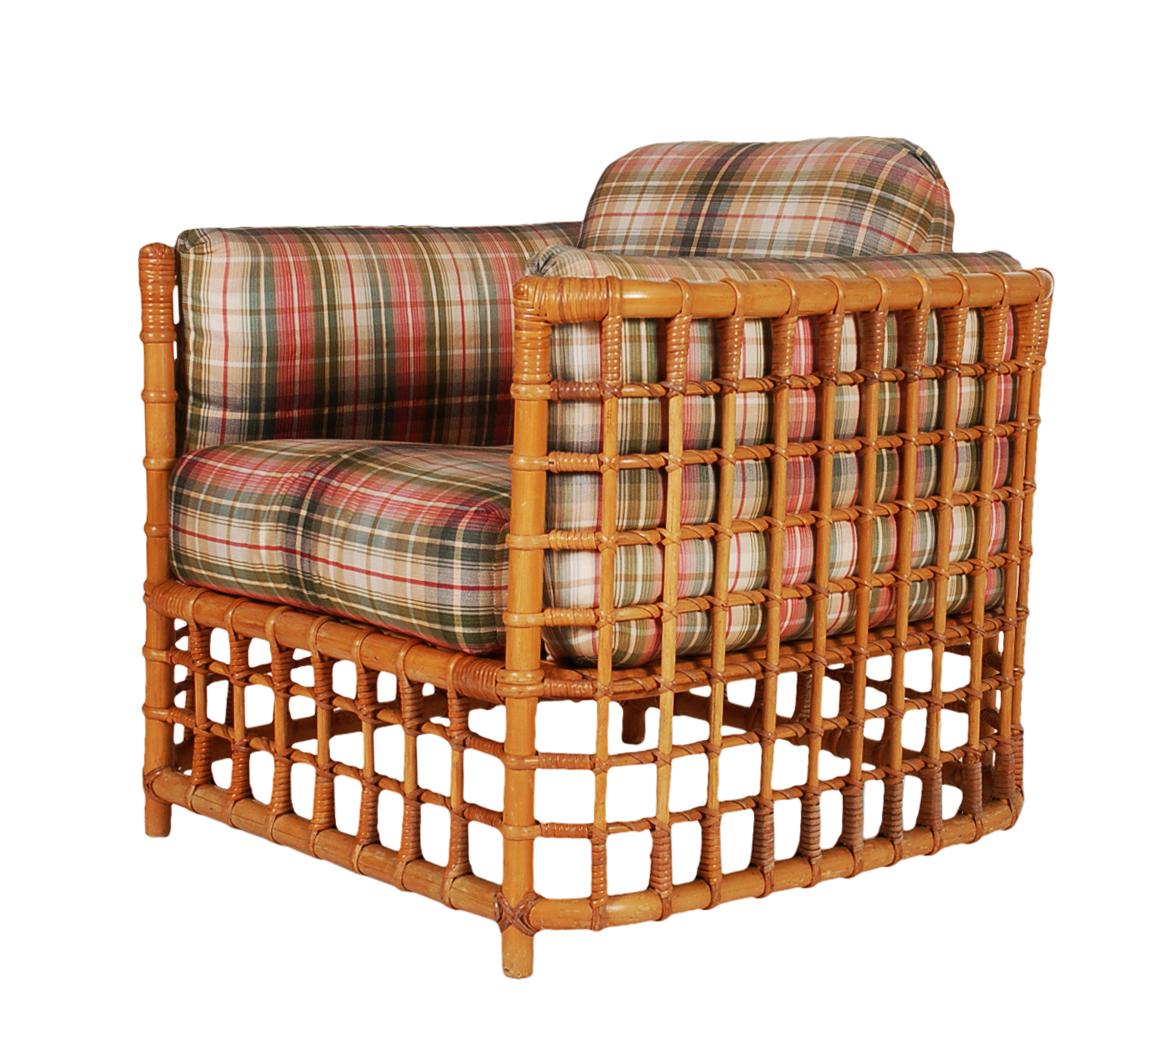 A handsome and tropically modern club chair and ottoman, circa 1970s. This was designed by Henry Olko and produced by Willow & Reed. It features handmade rattan construction with cushions. Ottoman measures: W 24, D 23, H 18.